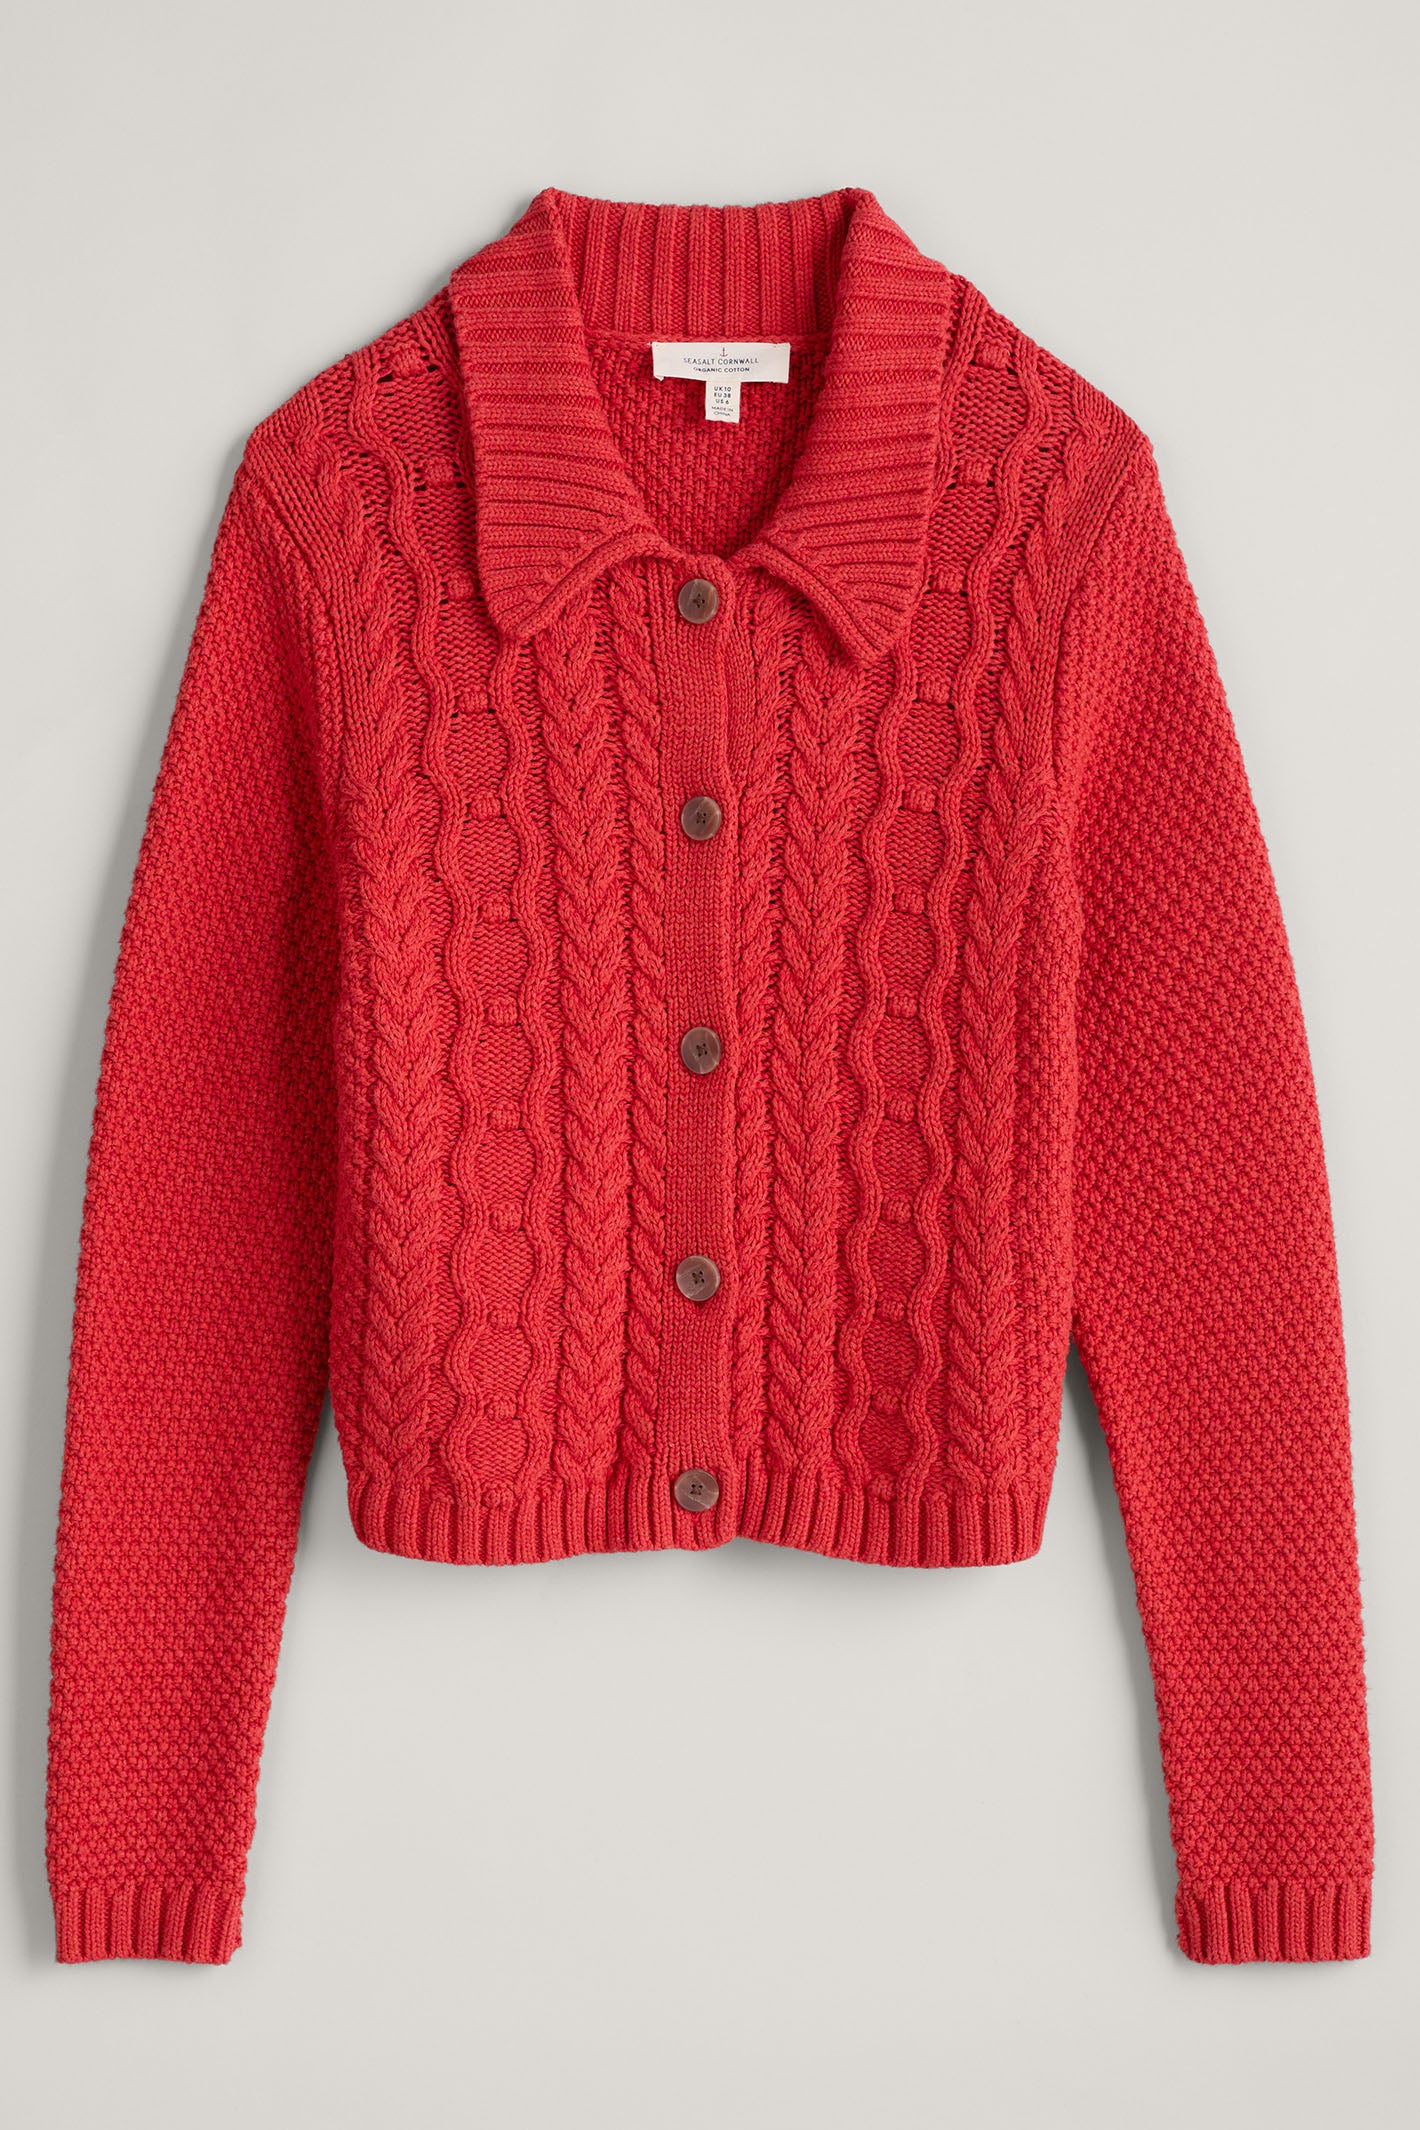 Seasalt Forest Ridge Red Tomato Melange Cable Knit Collared Cardigan